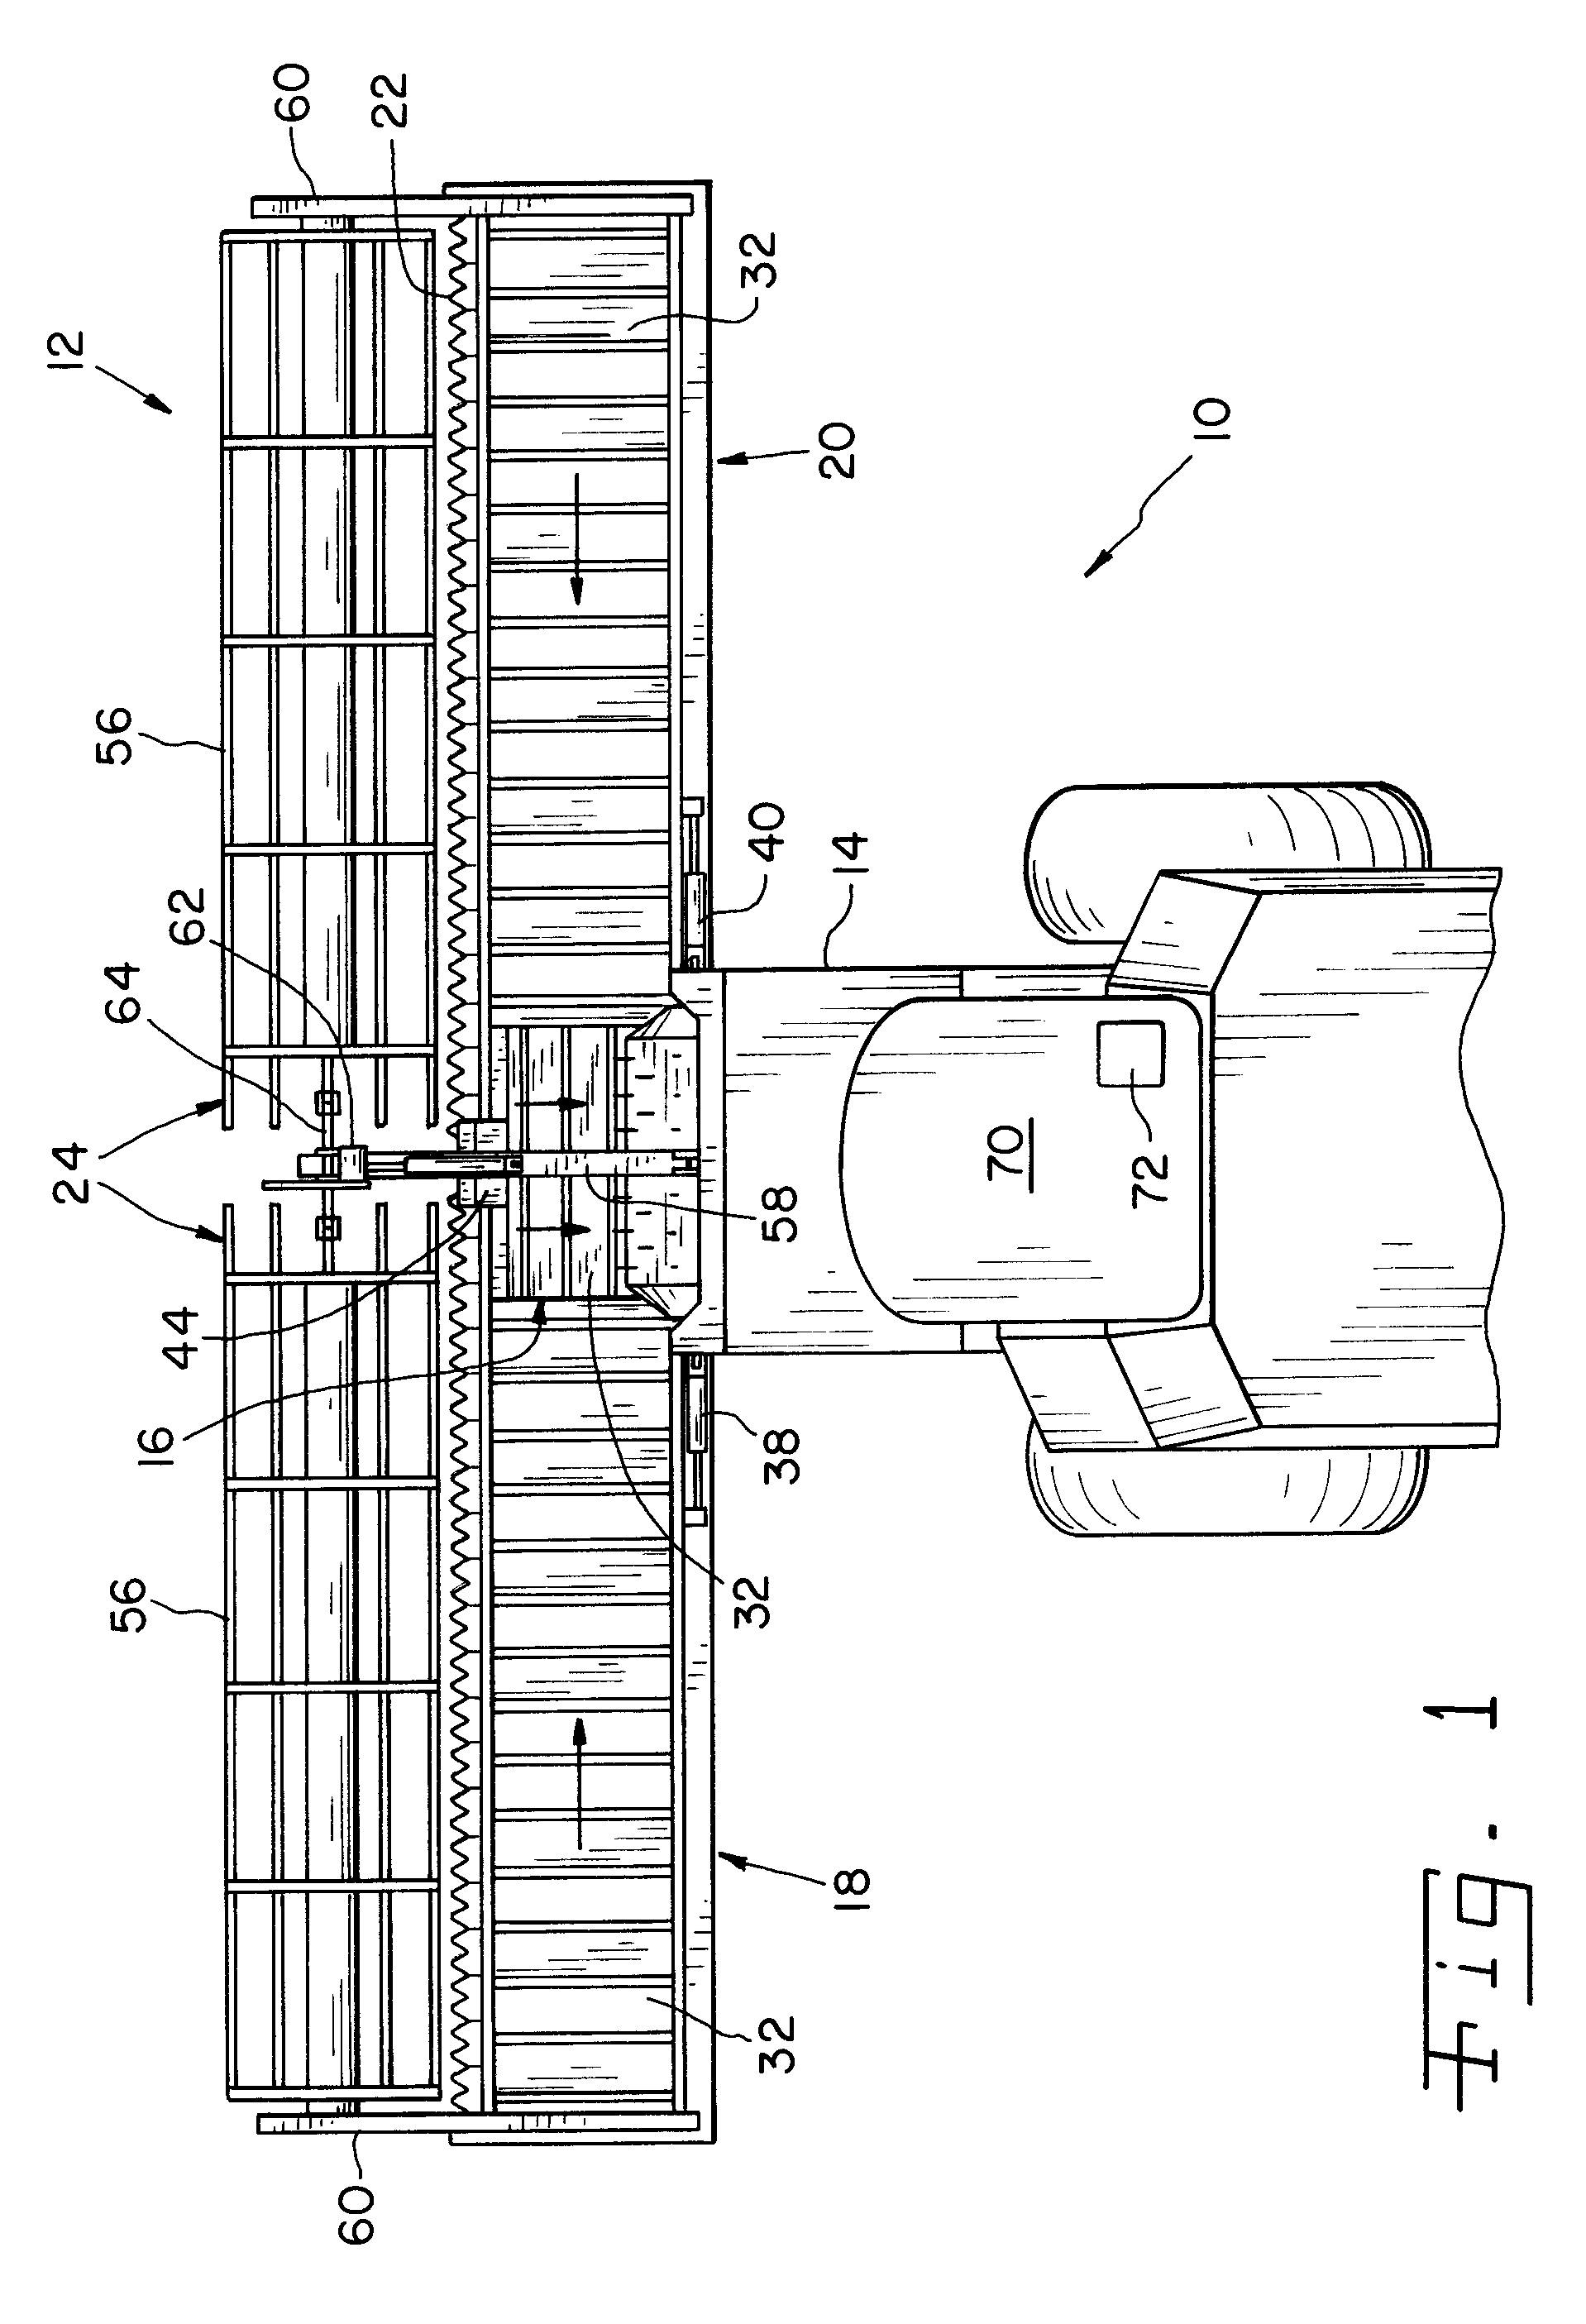 Sectionalized belt guide for draper belt in an agricultural harvesting machine